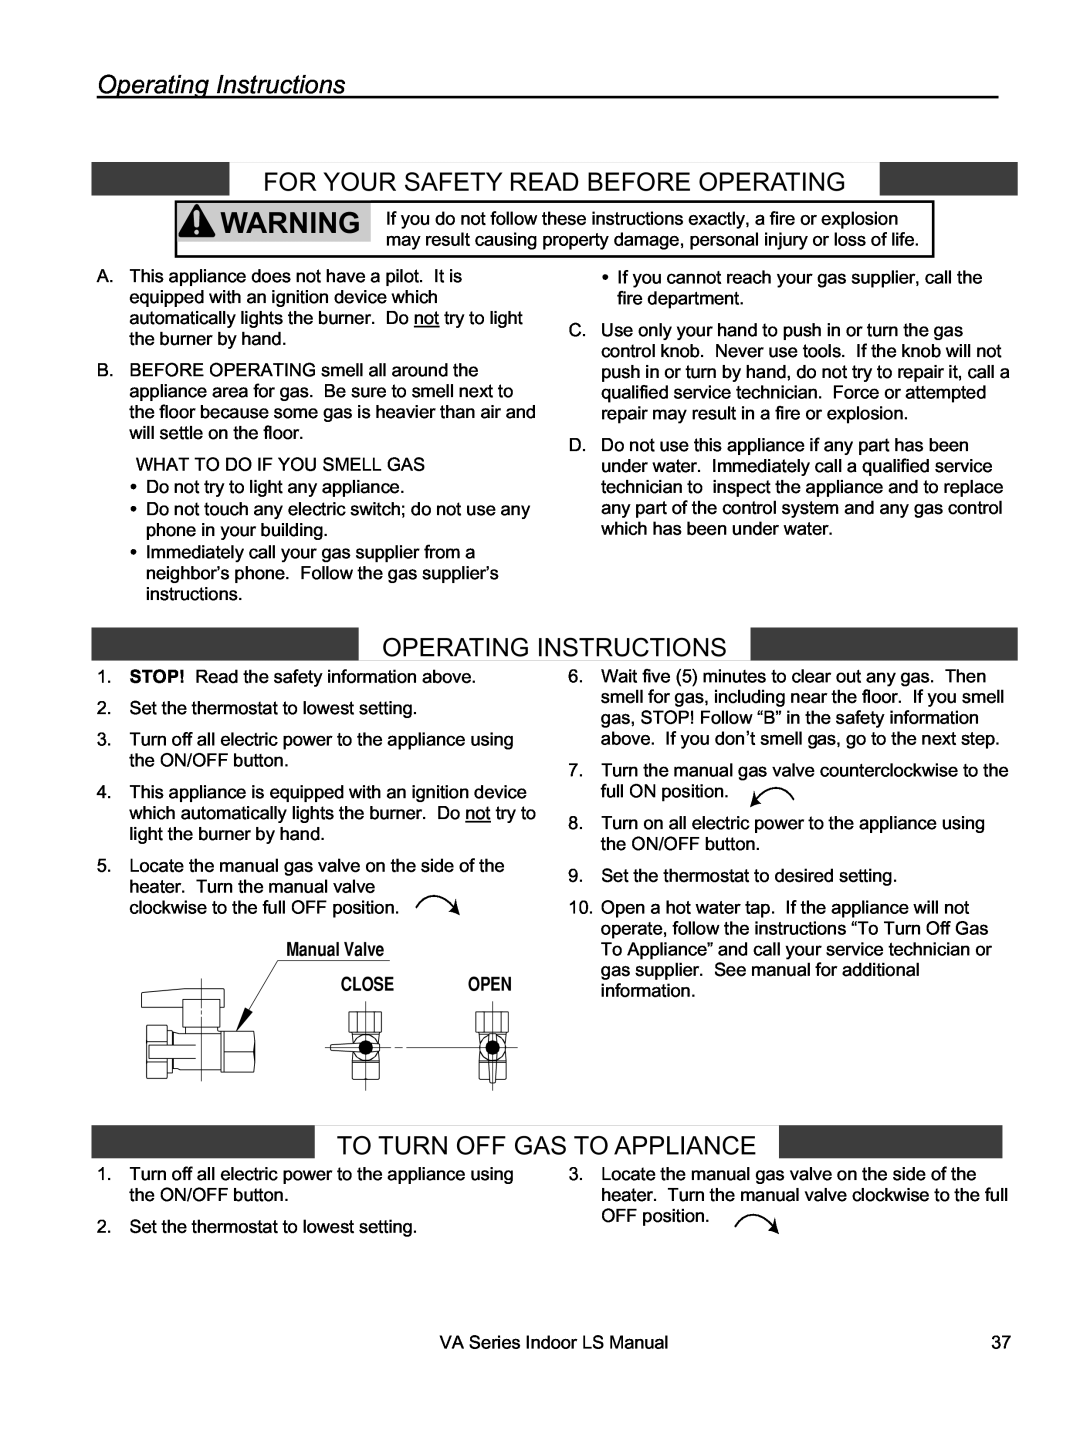 Rinnai REU-VA3237FFU Operating Instructions, For Your Safety Read Before Operating, To Turn Off Gas To Appliance 